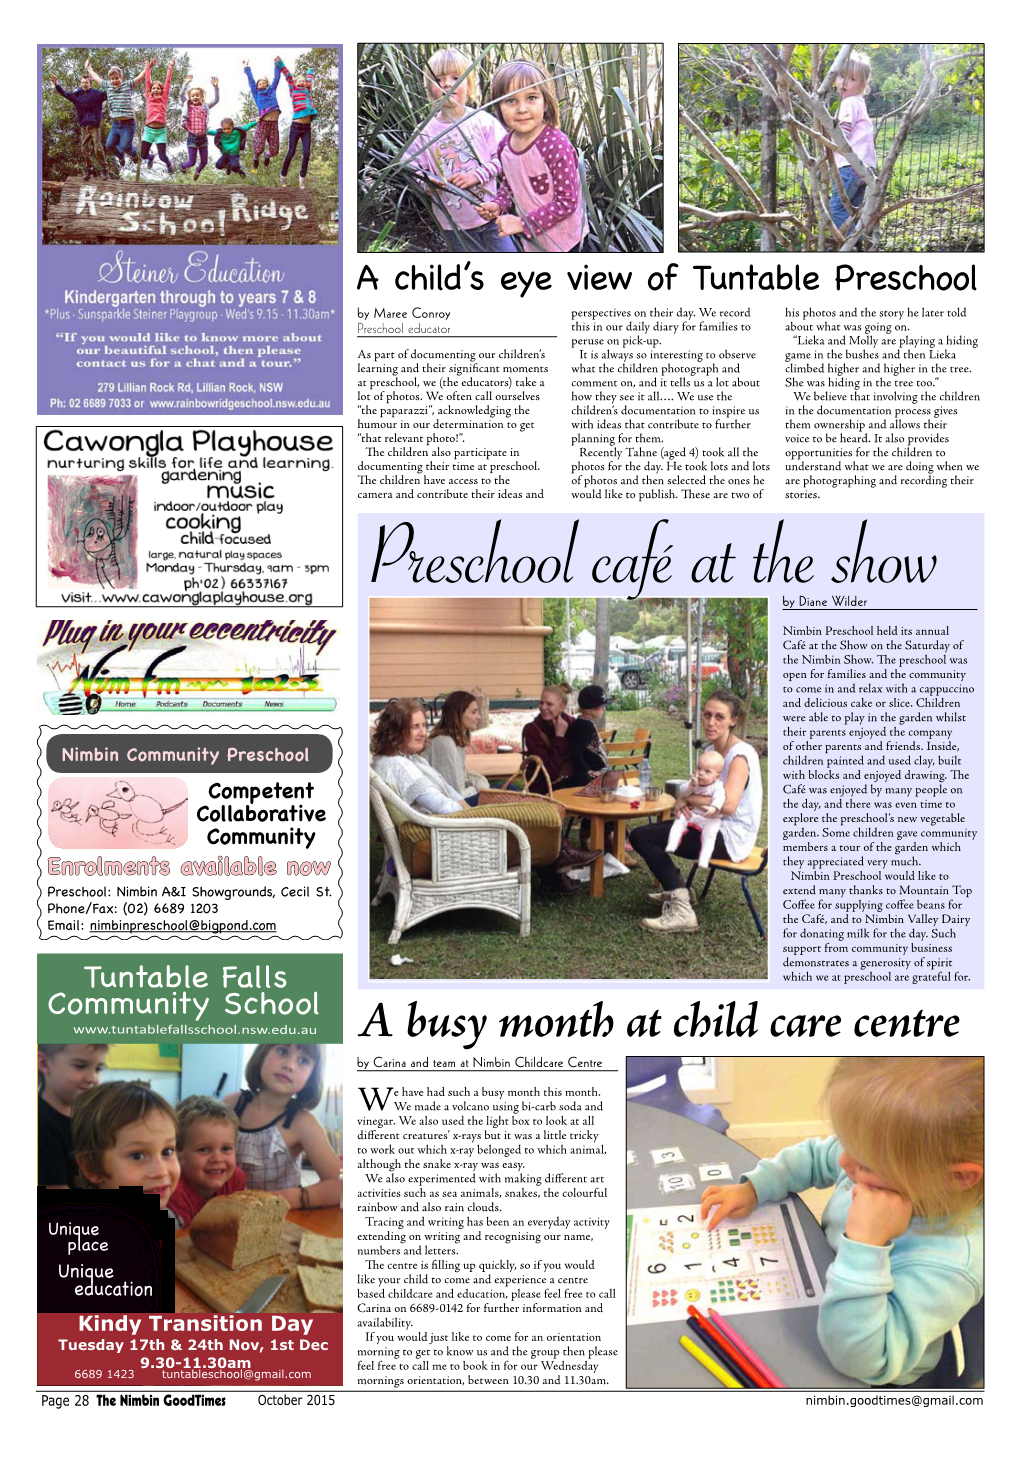 A Busy Month at Child Care Centre by Carina and Team at Nimbin Childcare Centre